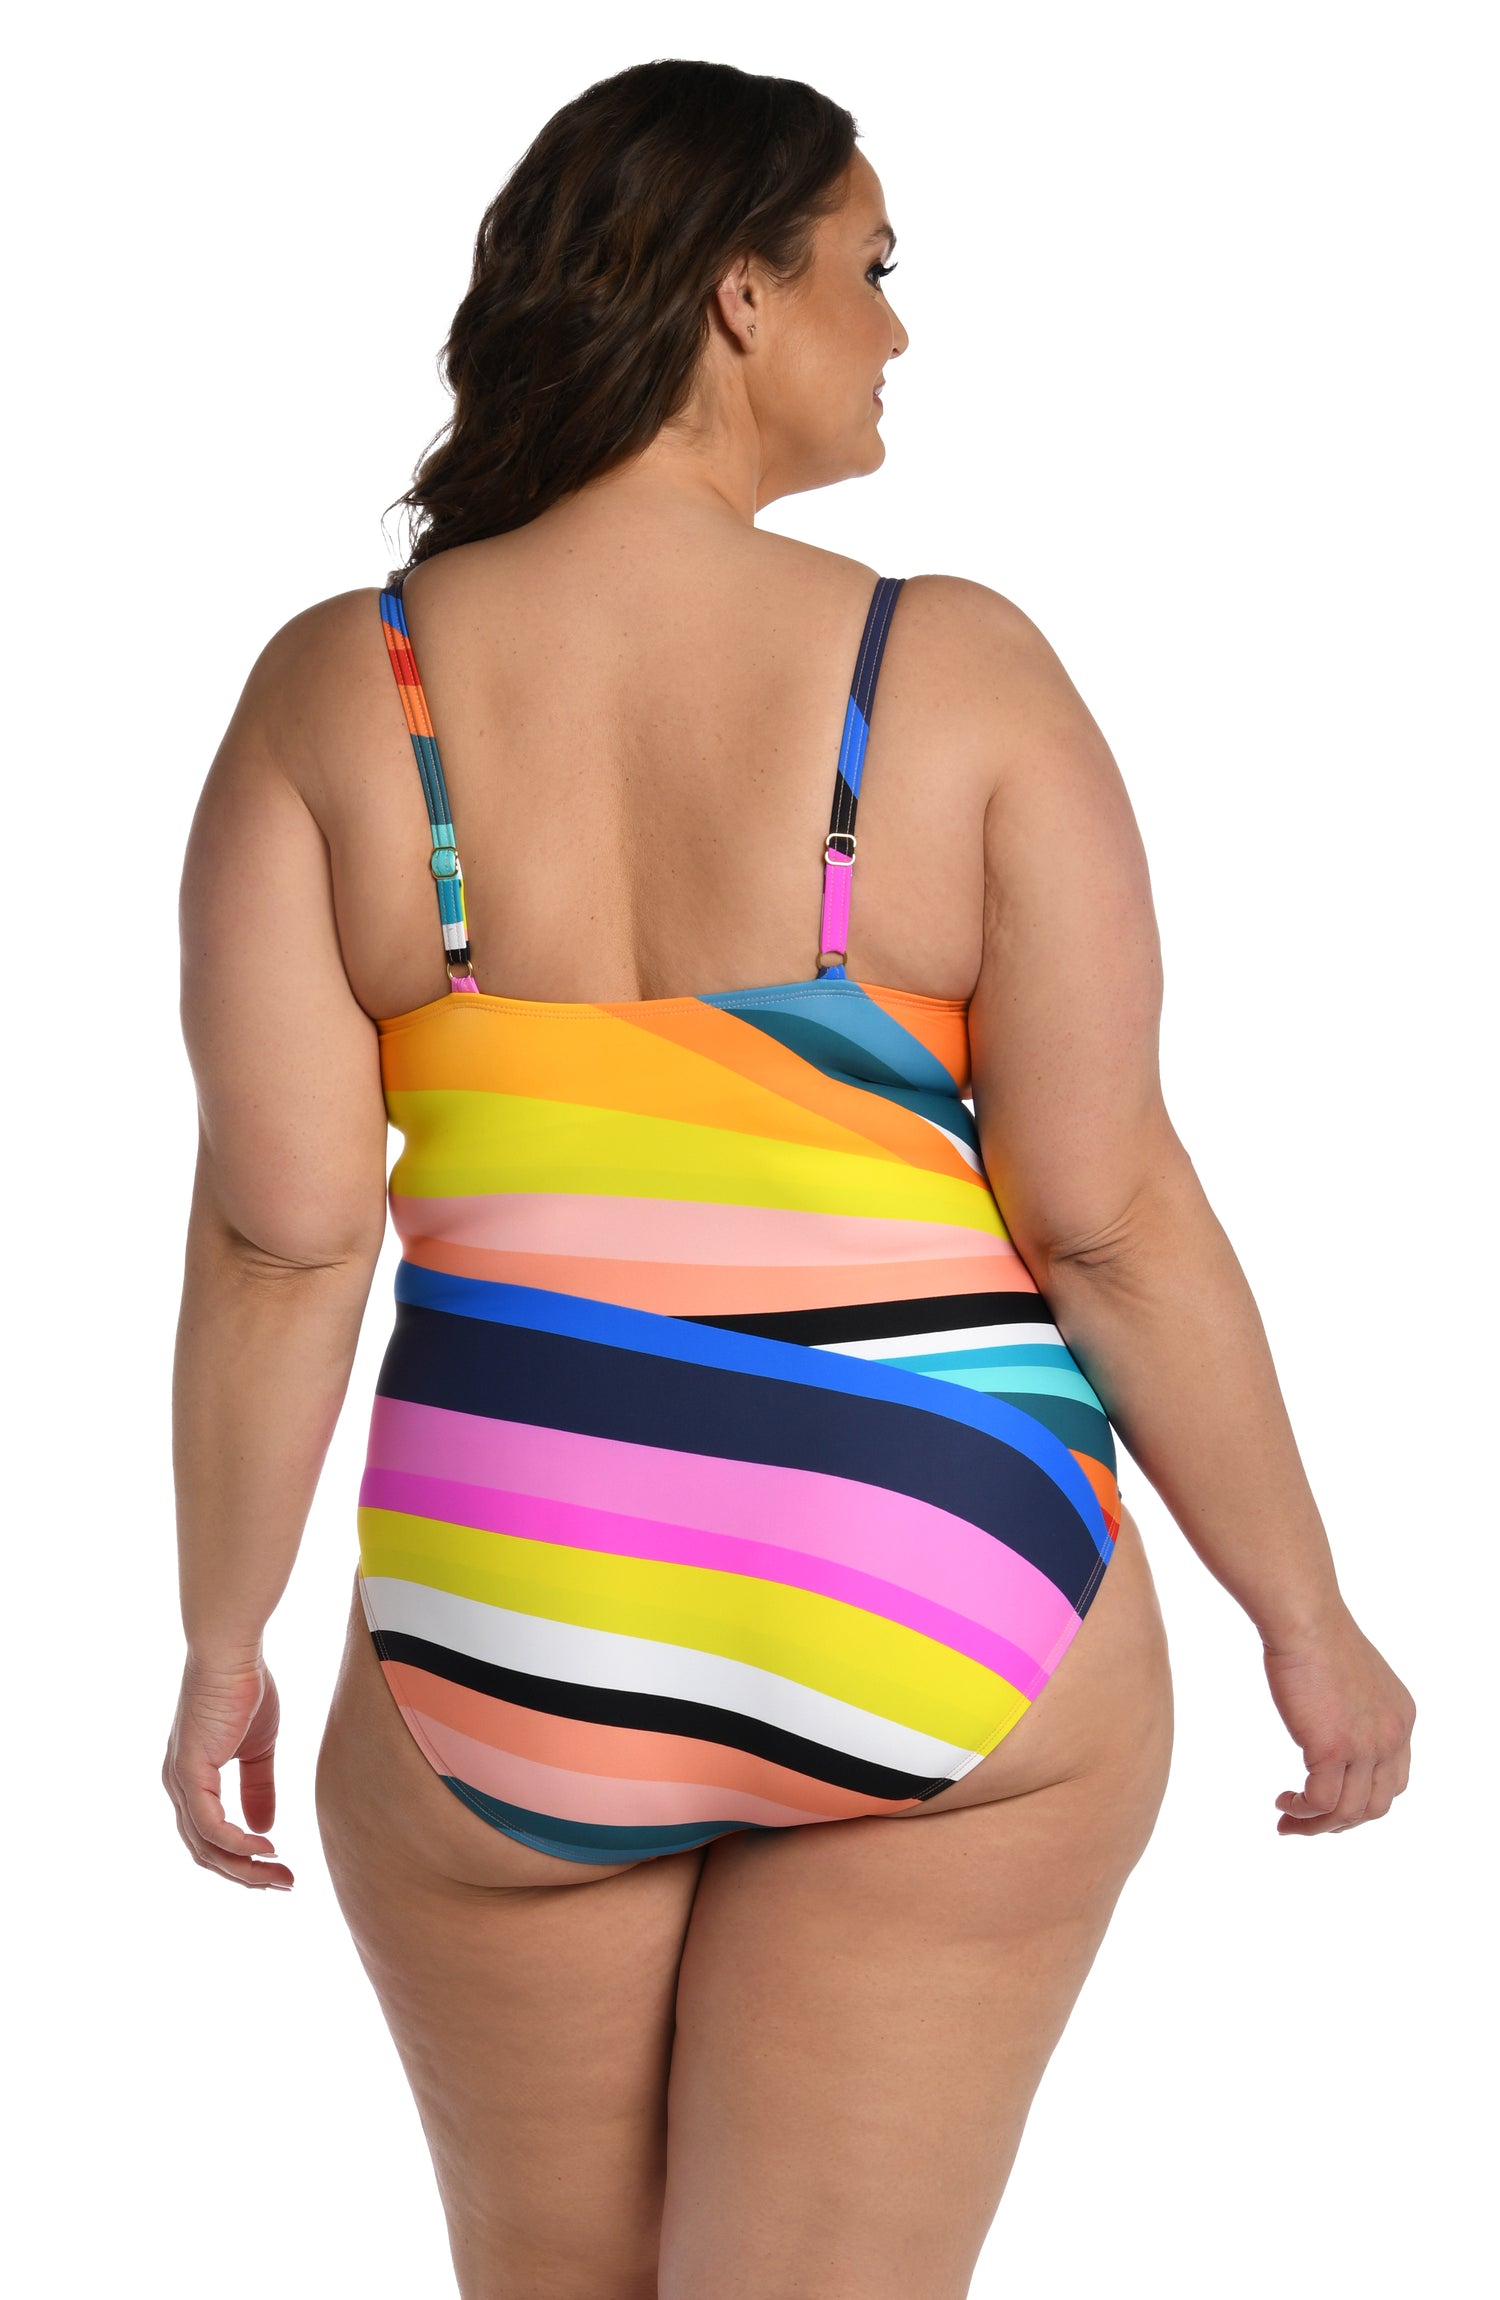 Model is wearing multi colored vibrant geometric printed lingerie one piece from our Sunscape collection!